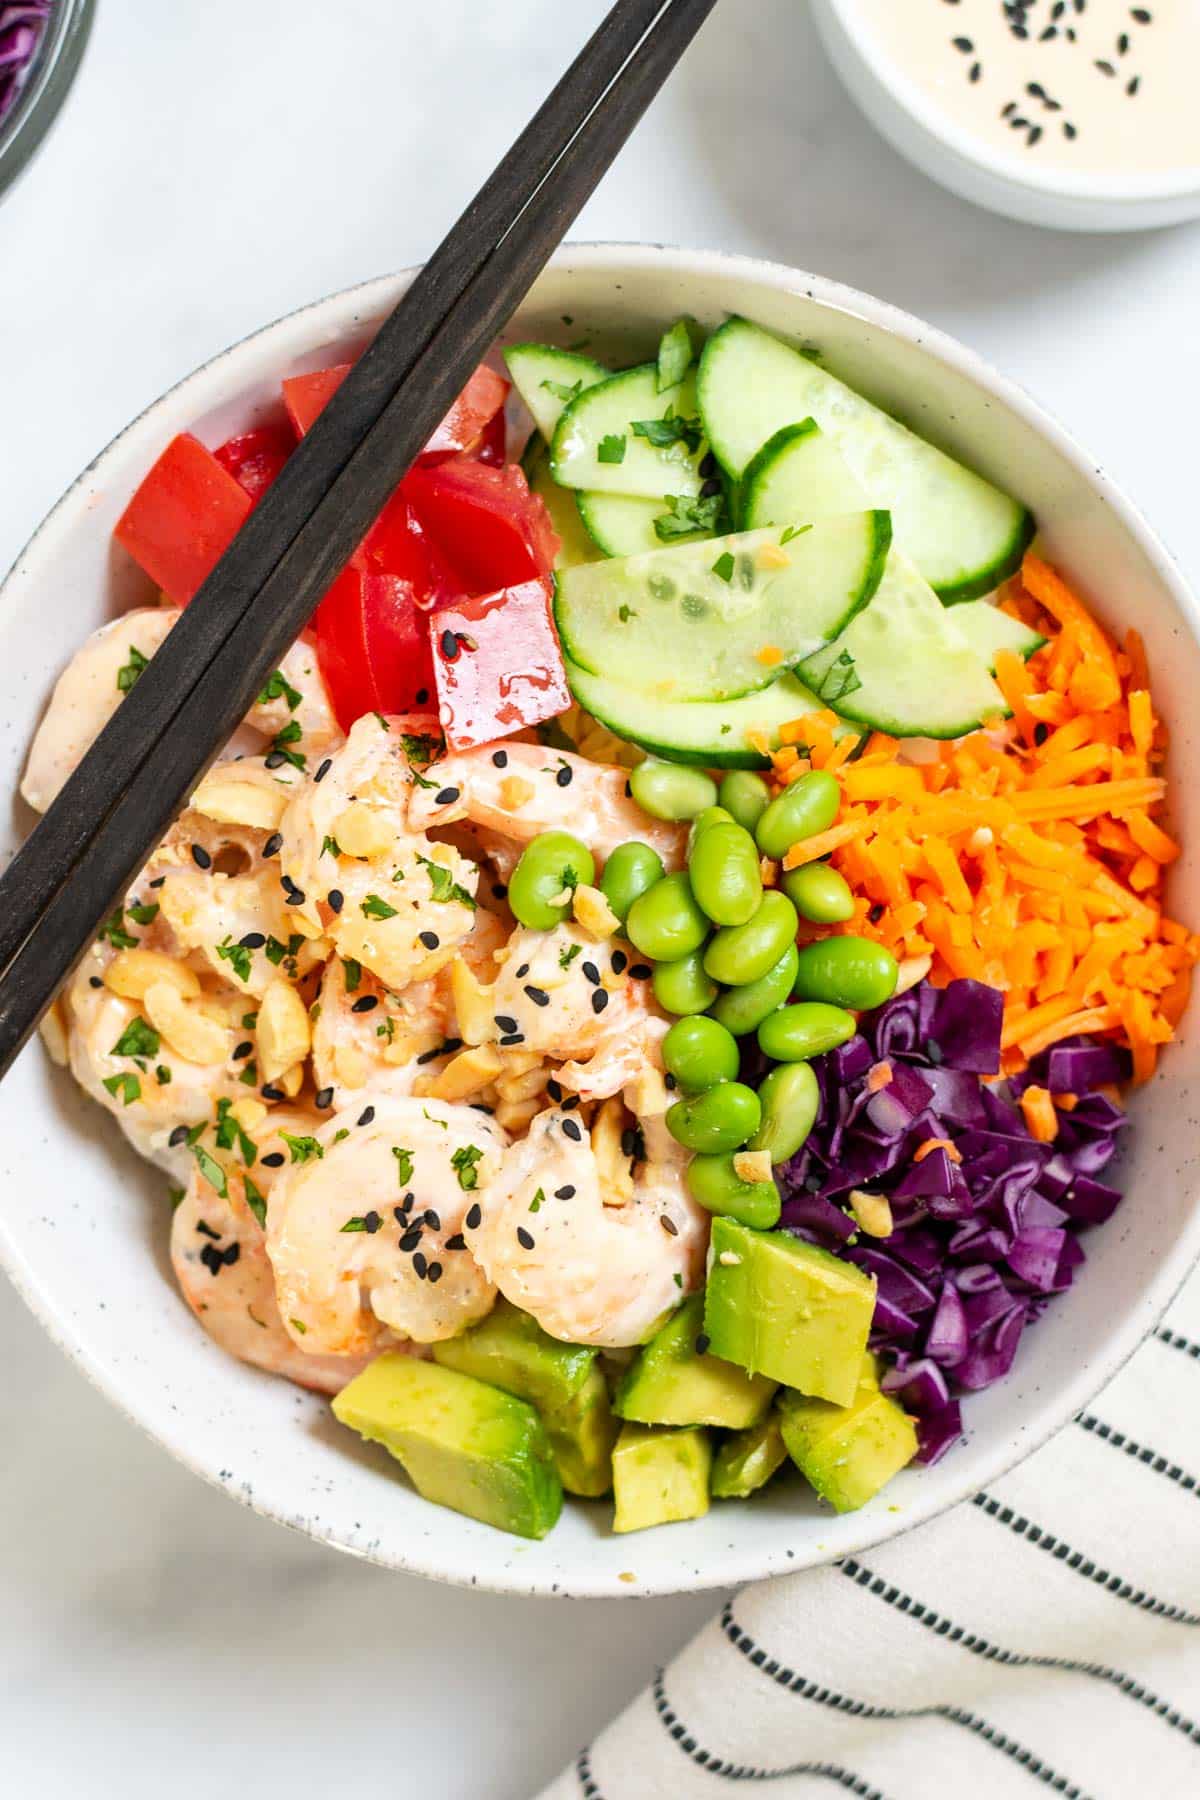 Easy shrimp poke bowl in a bowl with sriracha mayo, tomatoes, cucumber, and other veggies. Chopsticks are placed on the bowl.